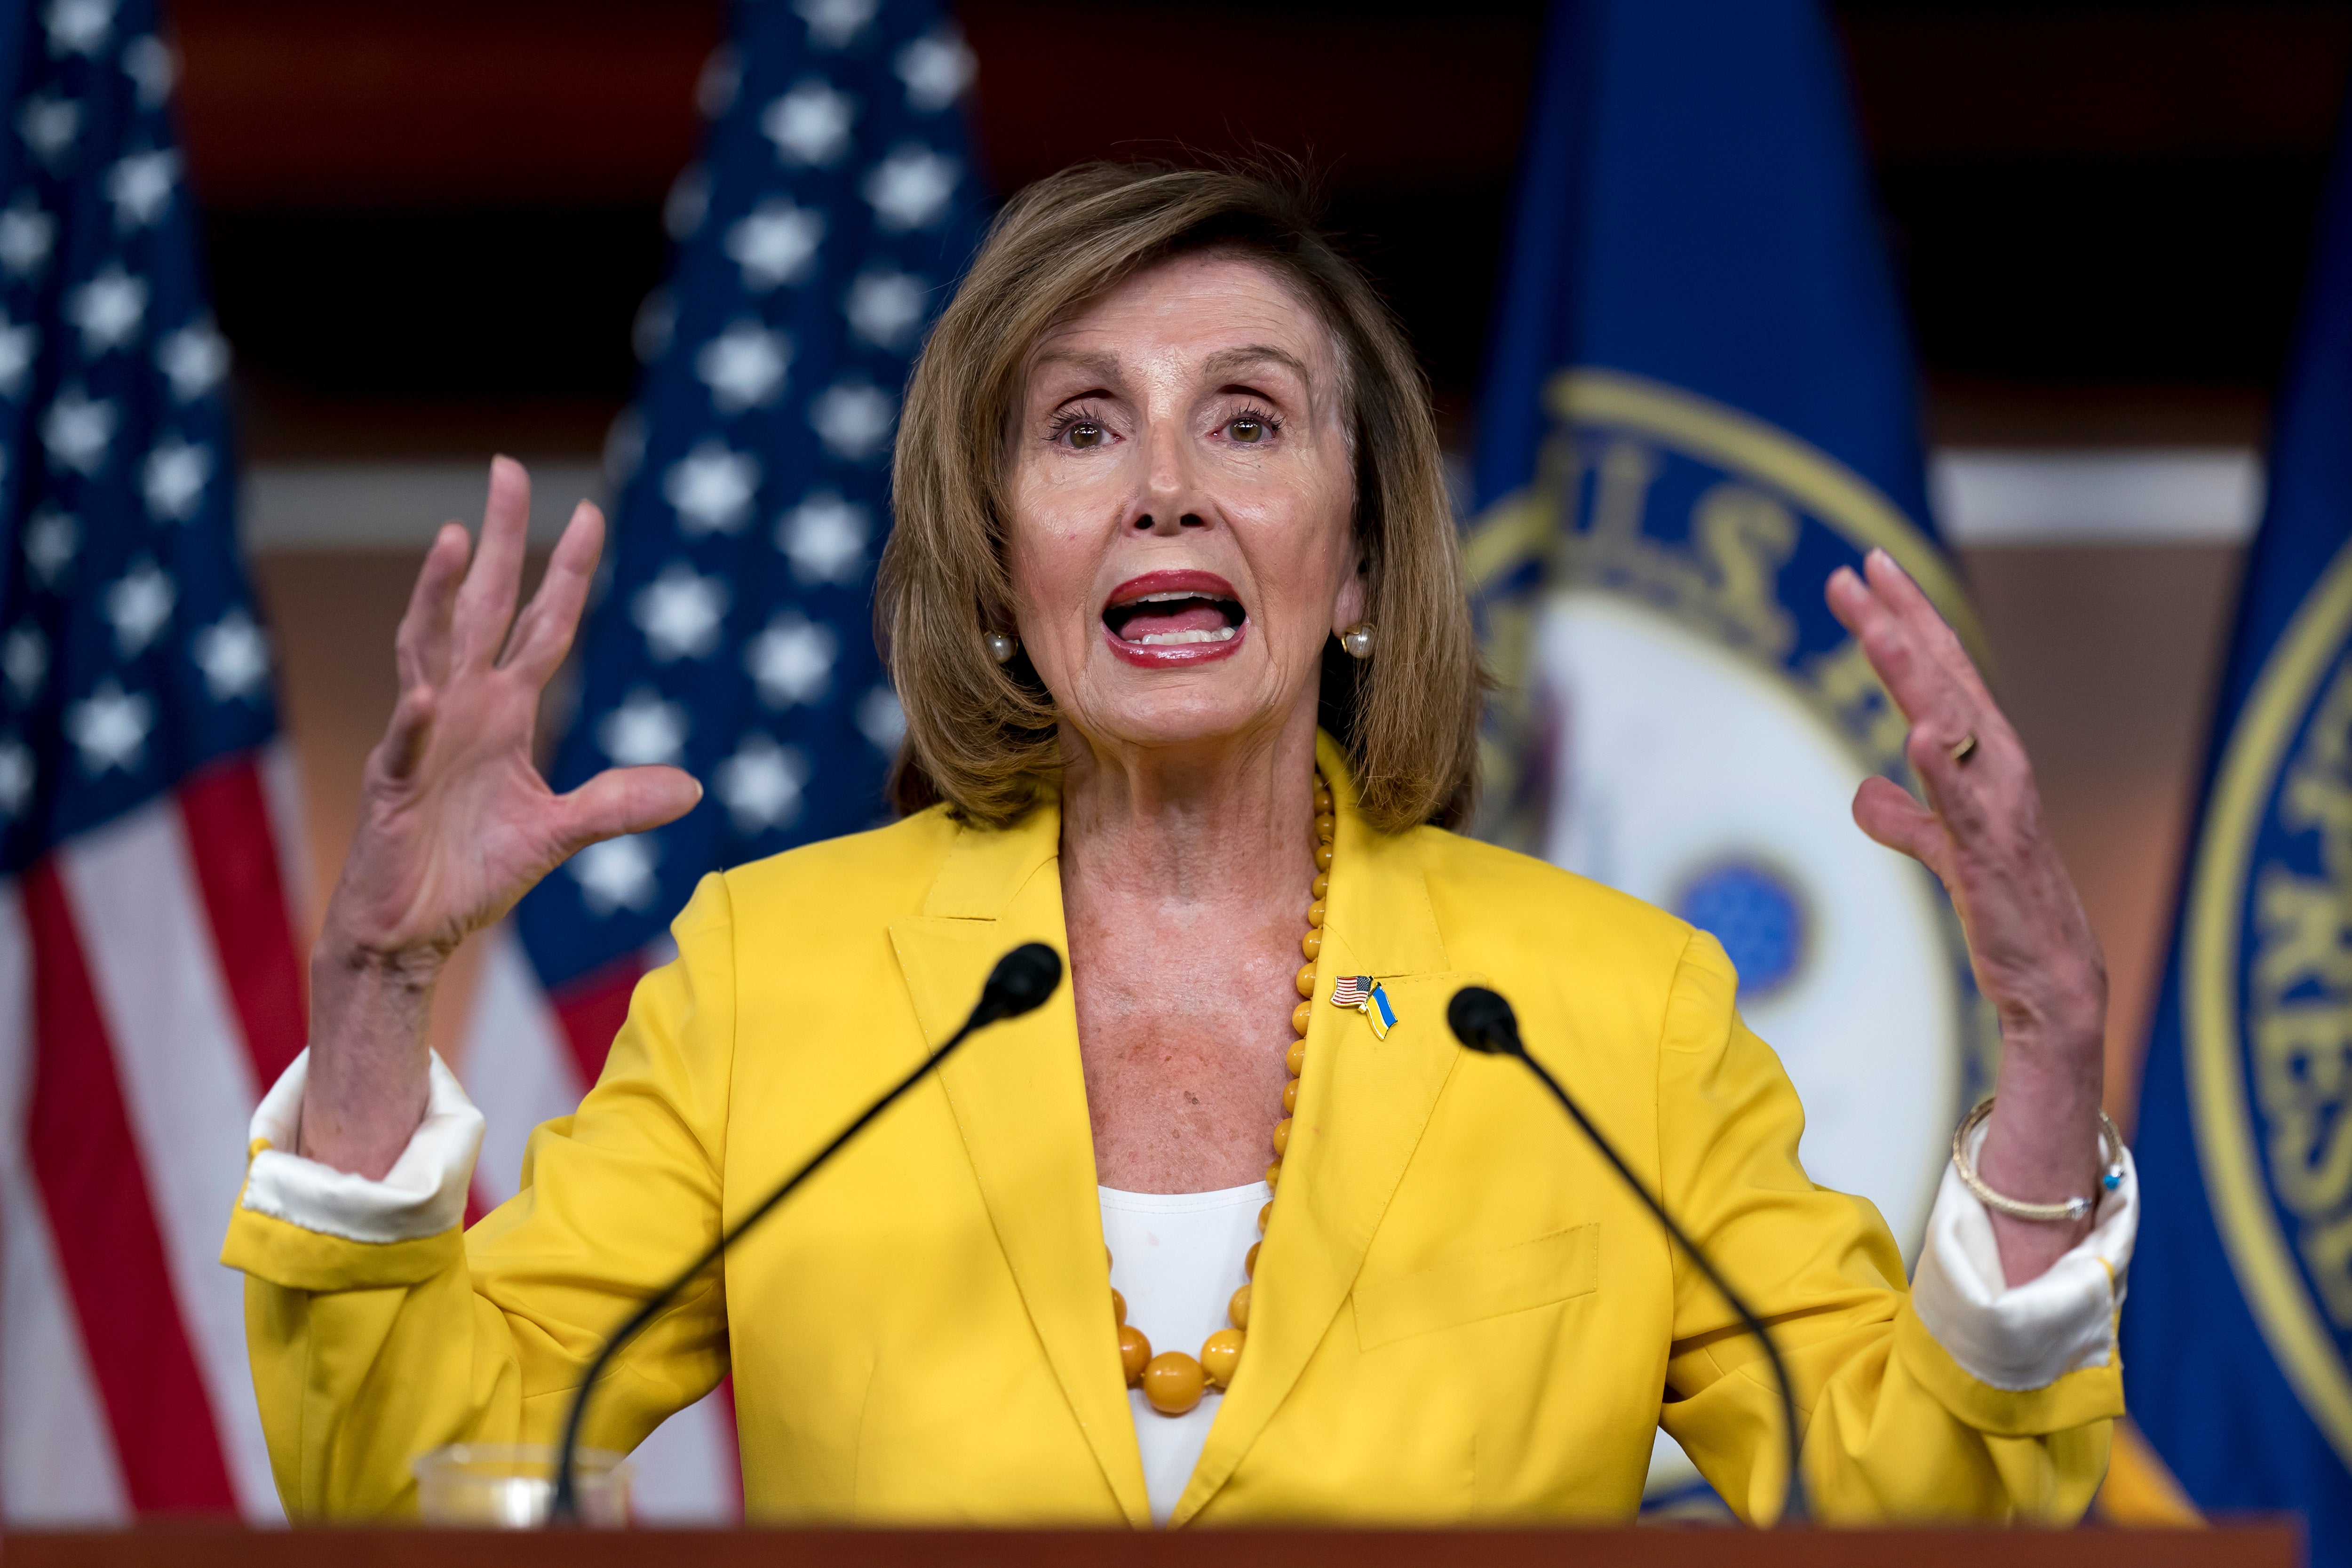 House Speaker Nancy Pelosi is yet to confirm if her Taiwan visit will go ahead